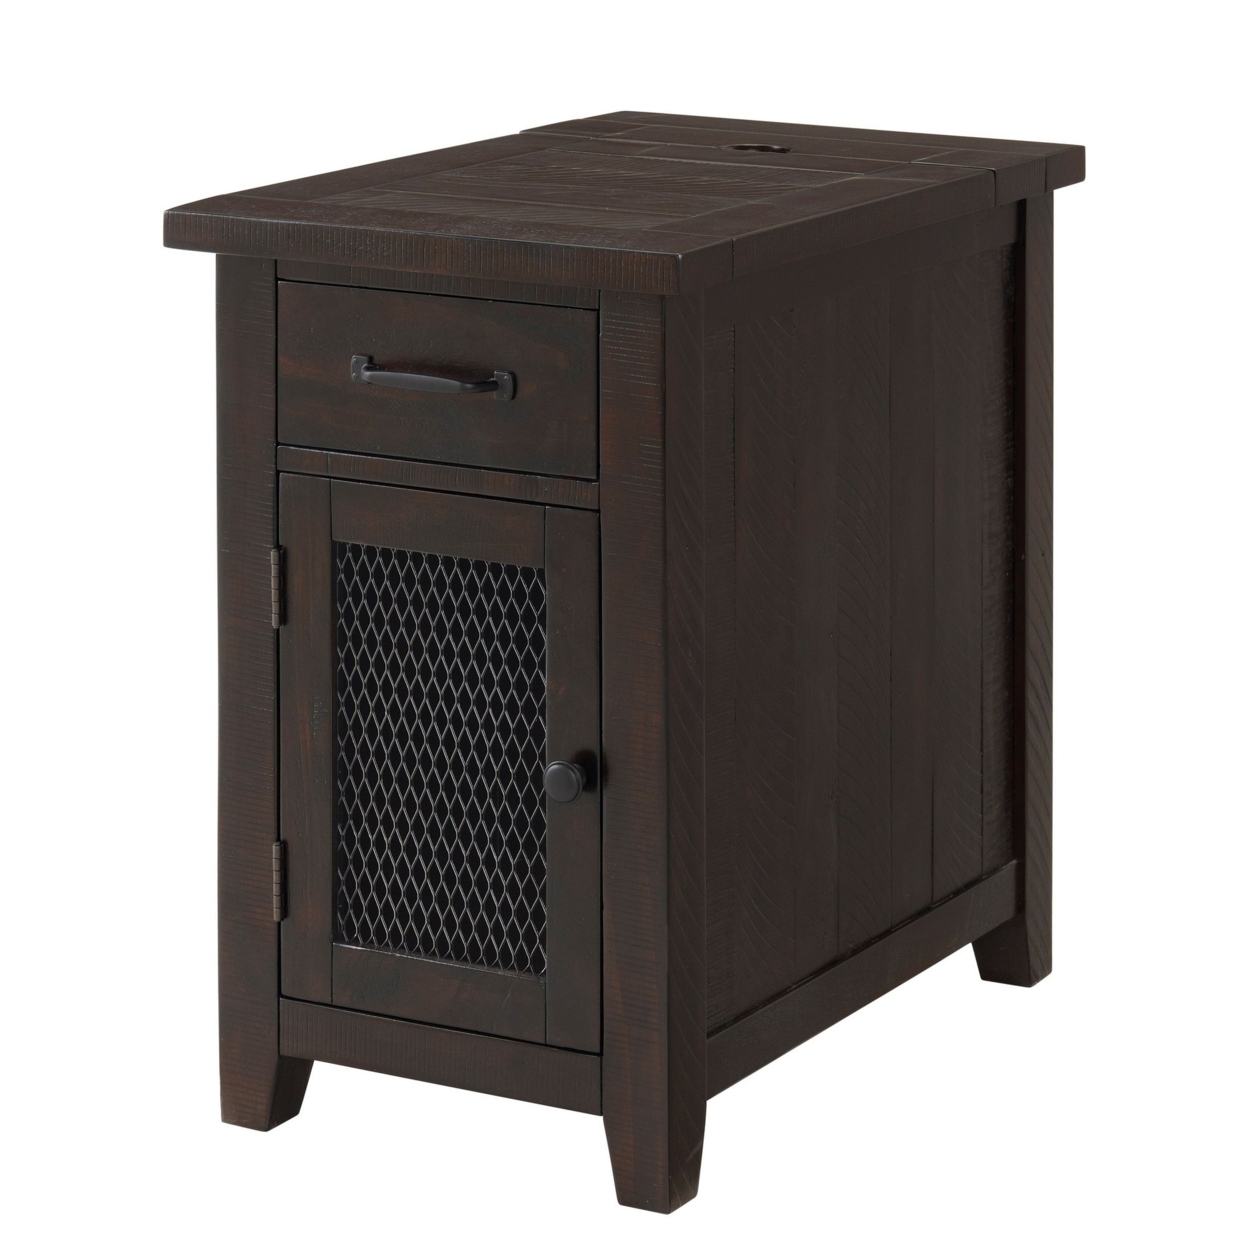 Chairside Table With 1 Drawer And 1 Wire Door, Espresso Brown- Saltoro Sherpi